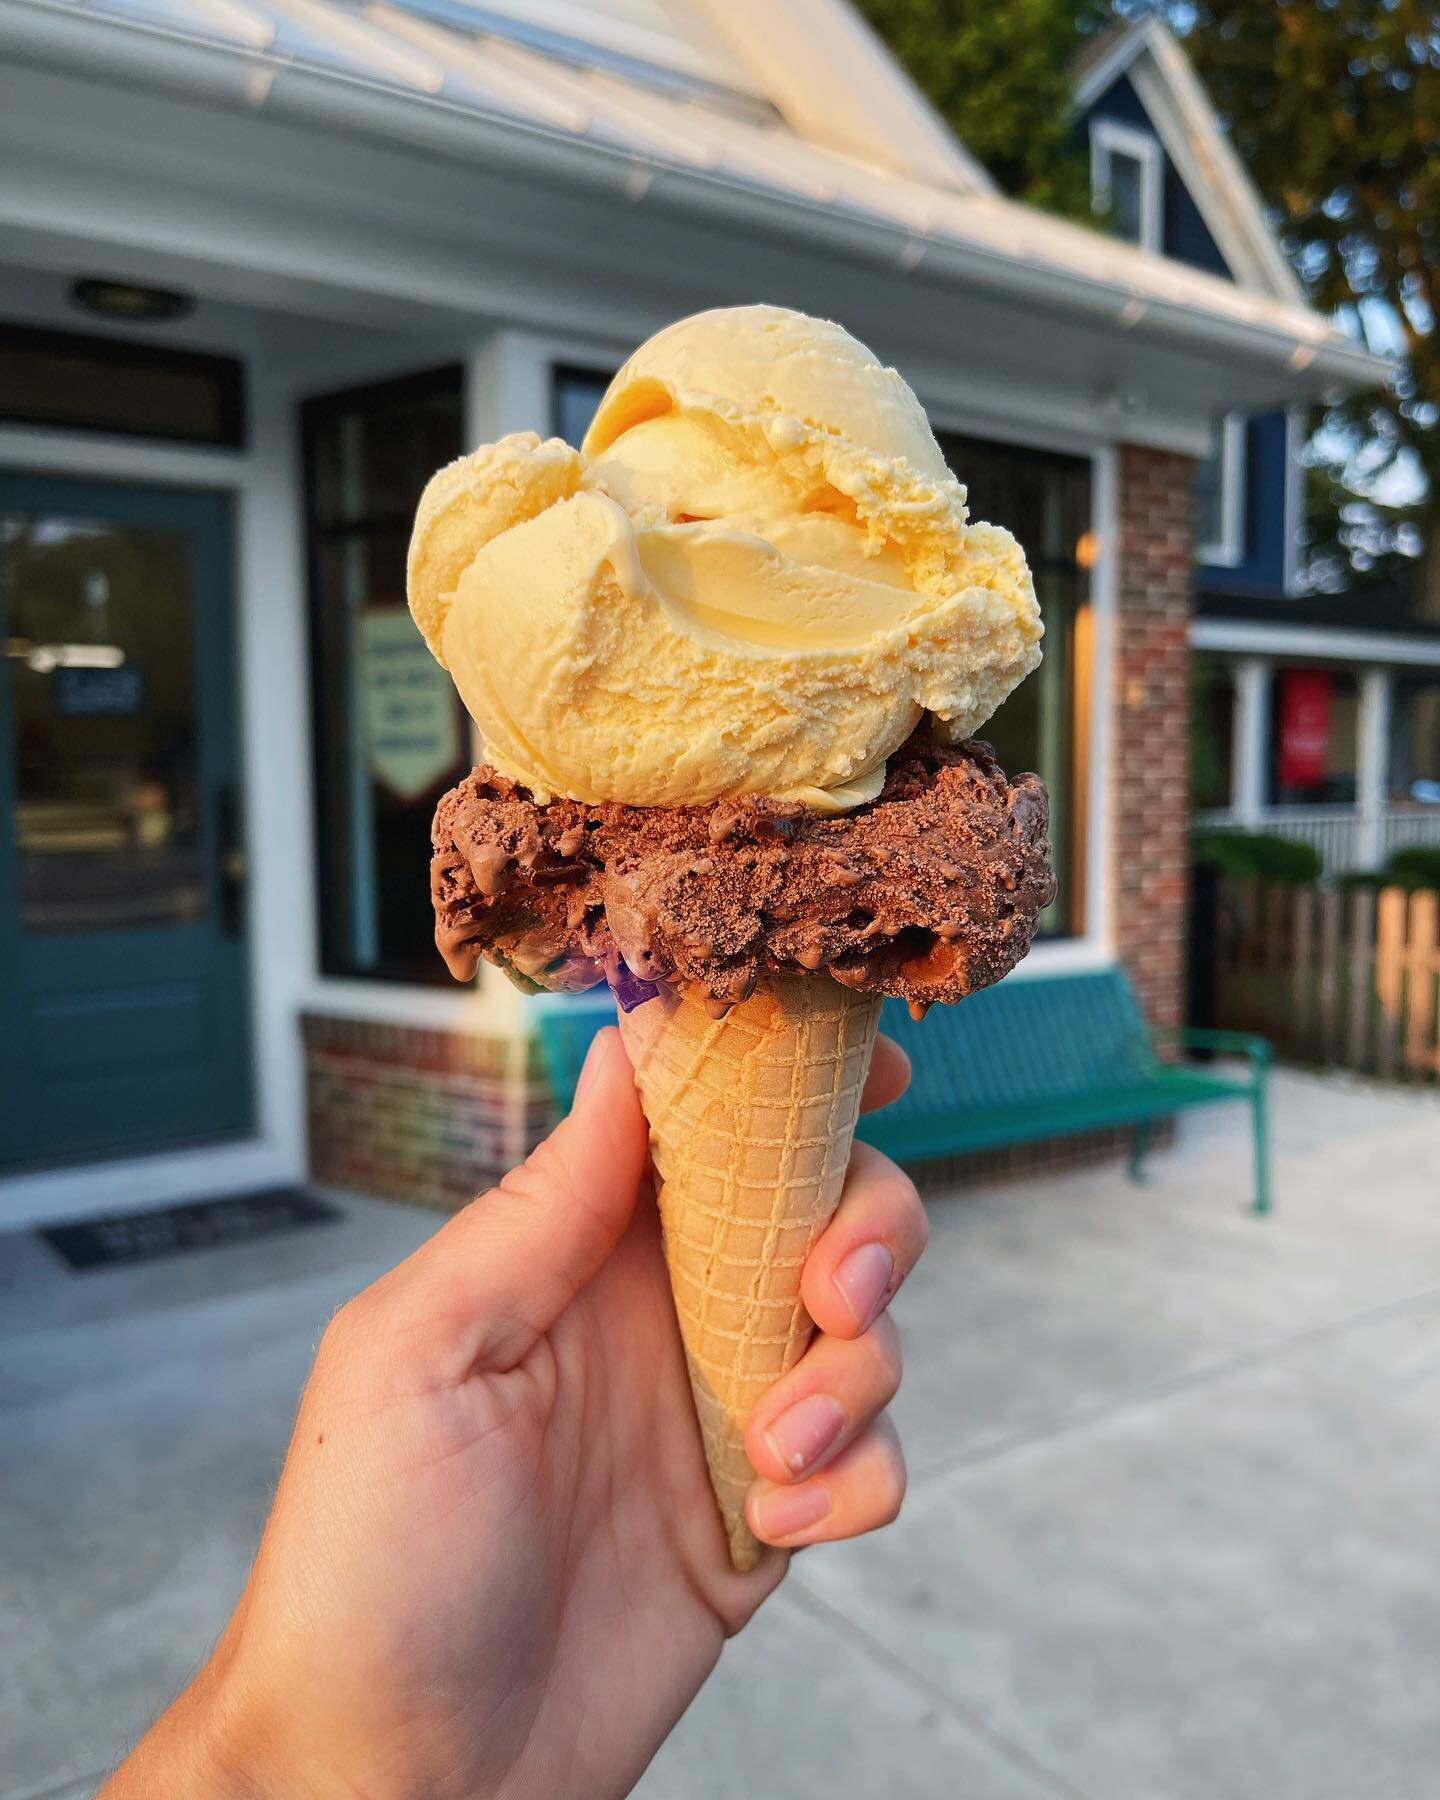 New flavor alert: Mango Ice Cream (pairs magically with dark chocolate chip) Open til 9pm! #jessiesoflinwood #coffeecreamcommunity
.
.
.

#coffee #cafe #coffeeshop #shopsmall #smallbusiness #local #localbusiness #shoplocal #supportsmall #lcservedhere